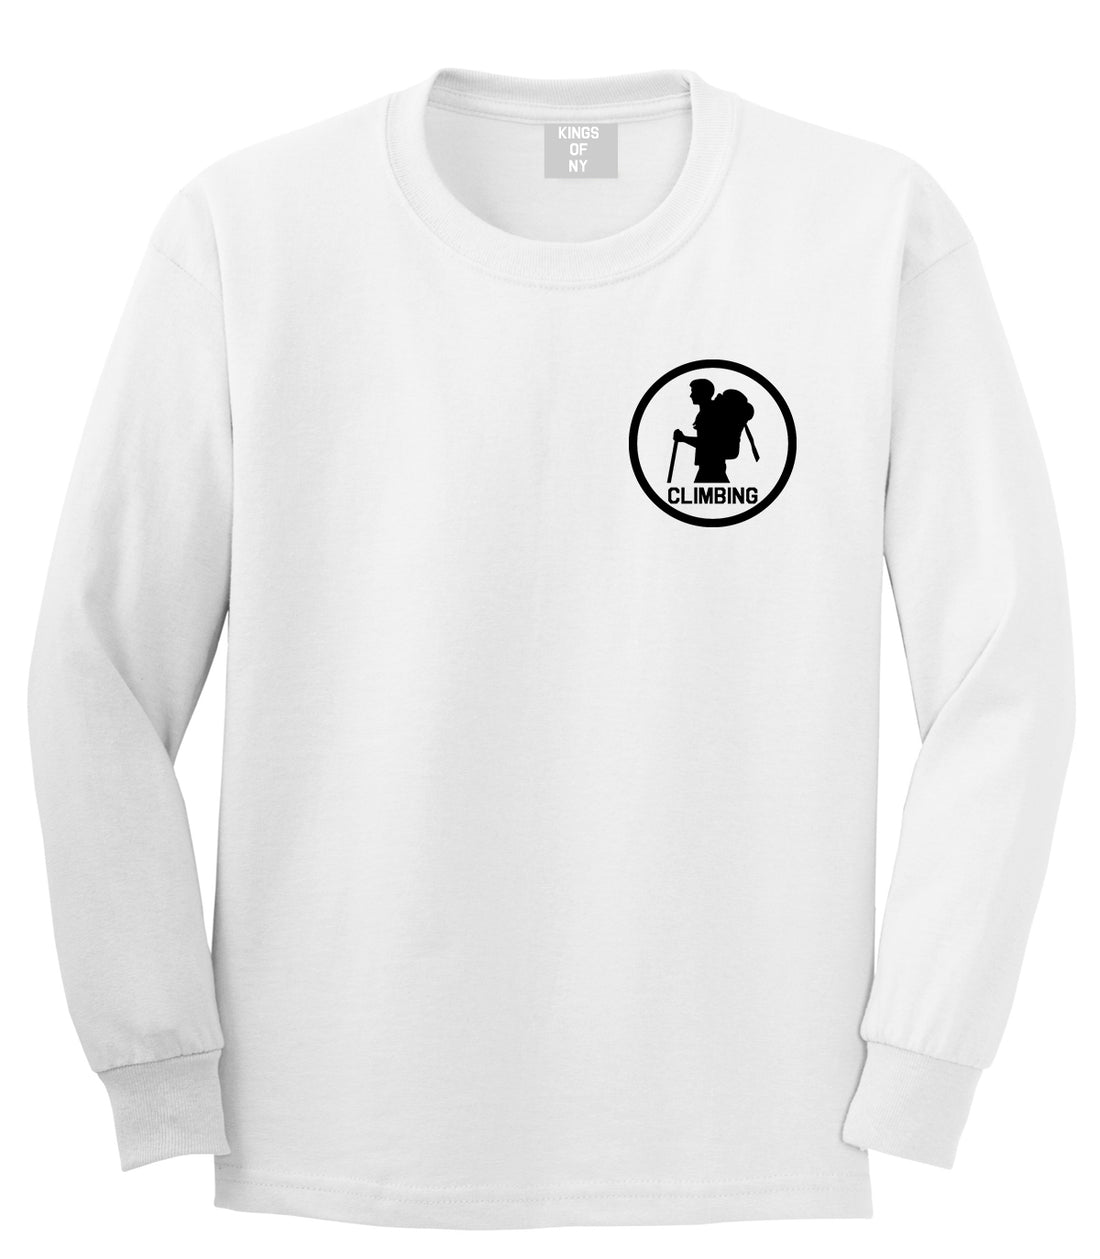 Climbing Hiker Chest White Long Sleeve T-Shirt by Kings Of NY